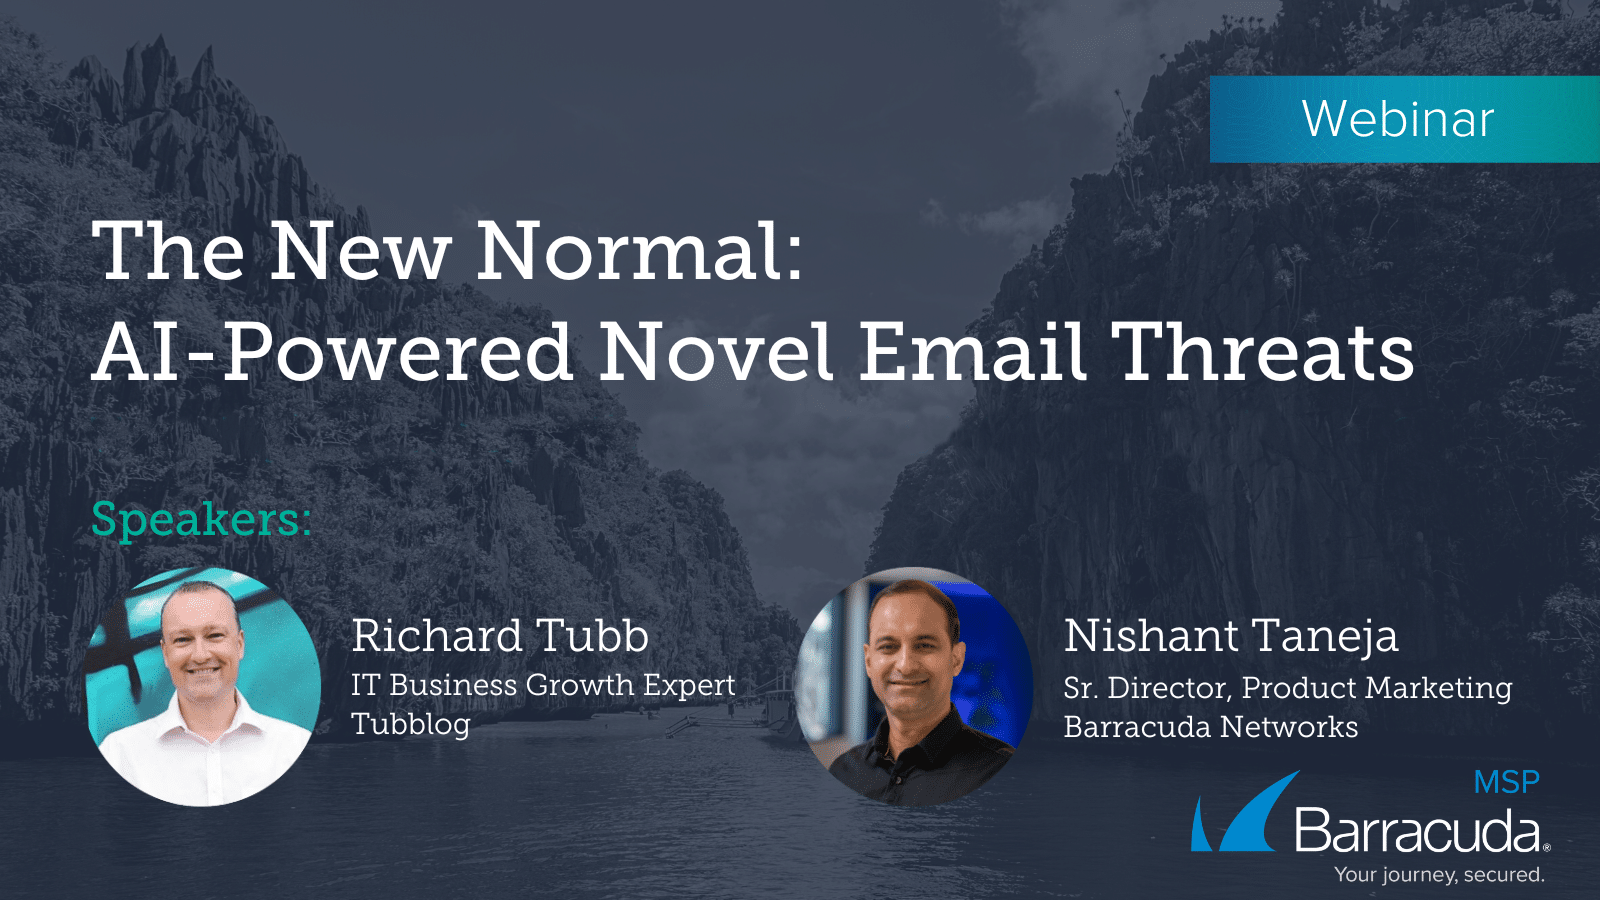 Webinar: The New Normal: AI-Powered Novel Email Threats image